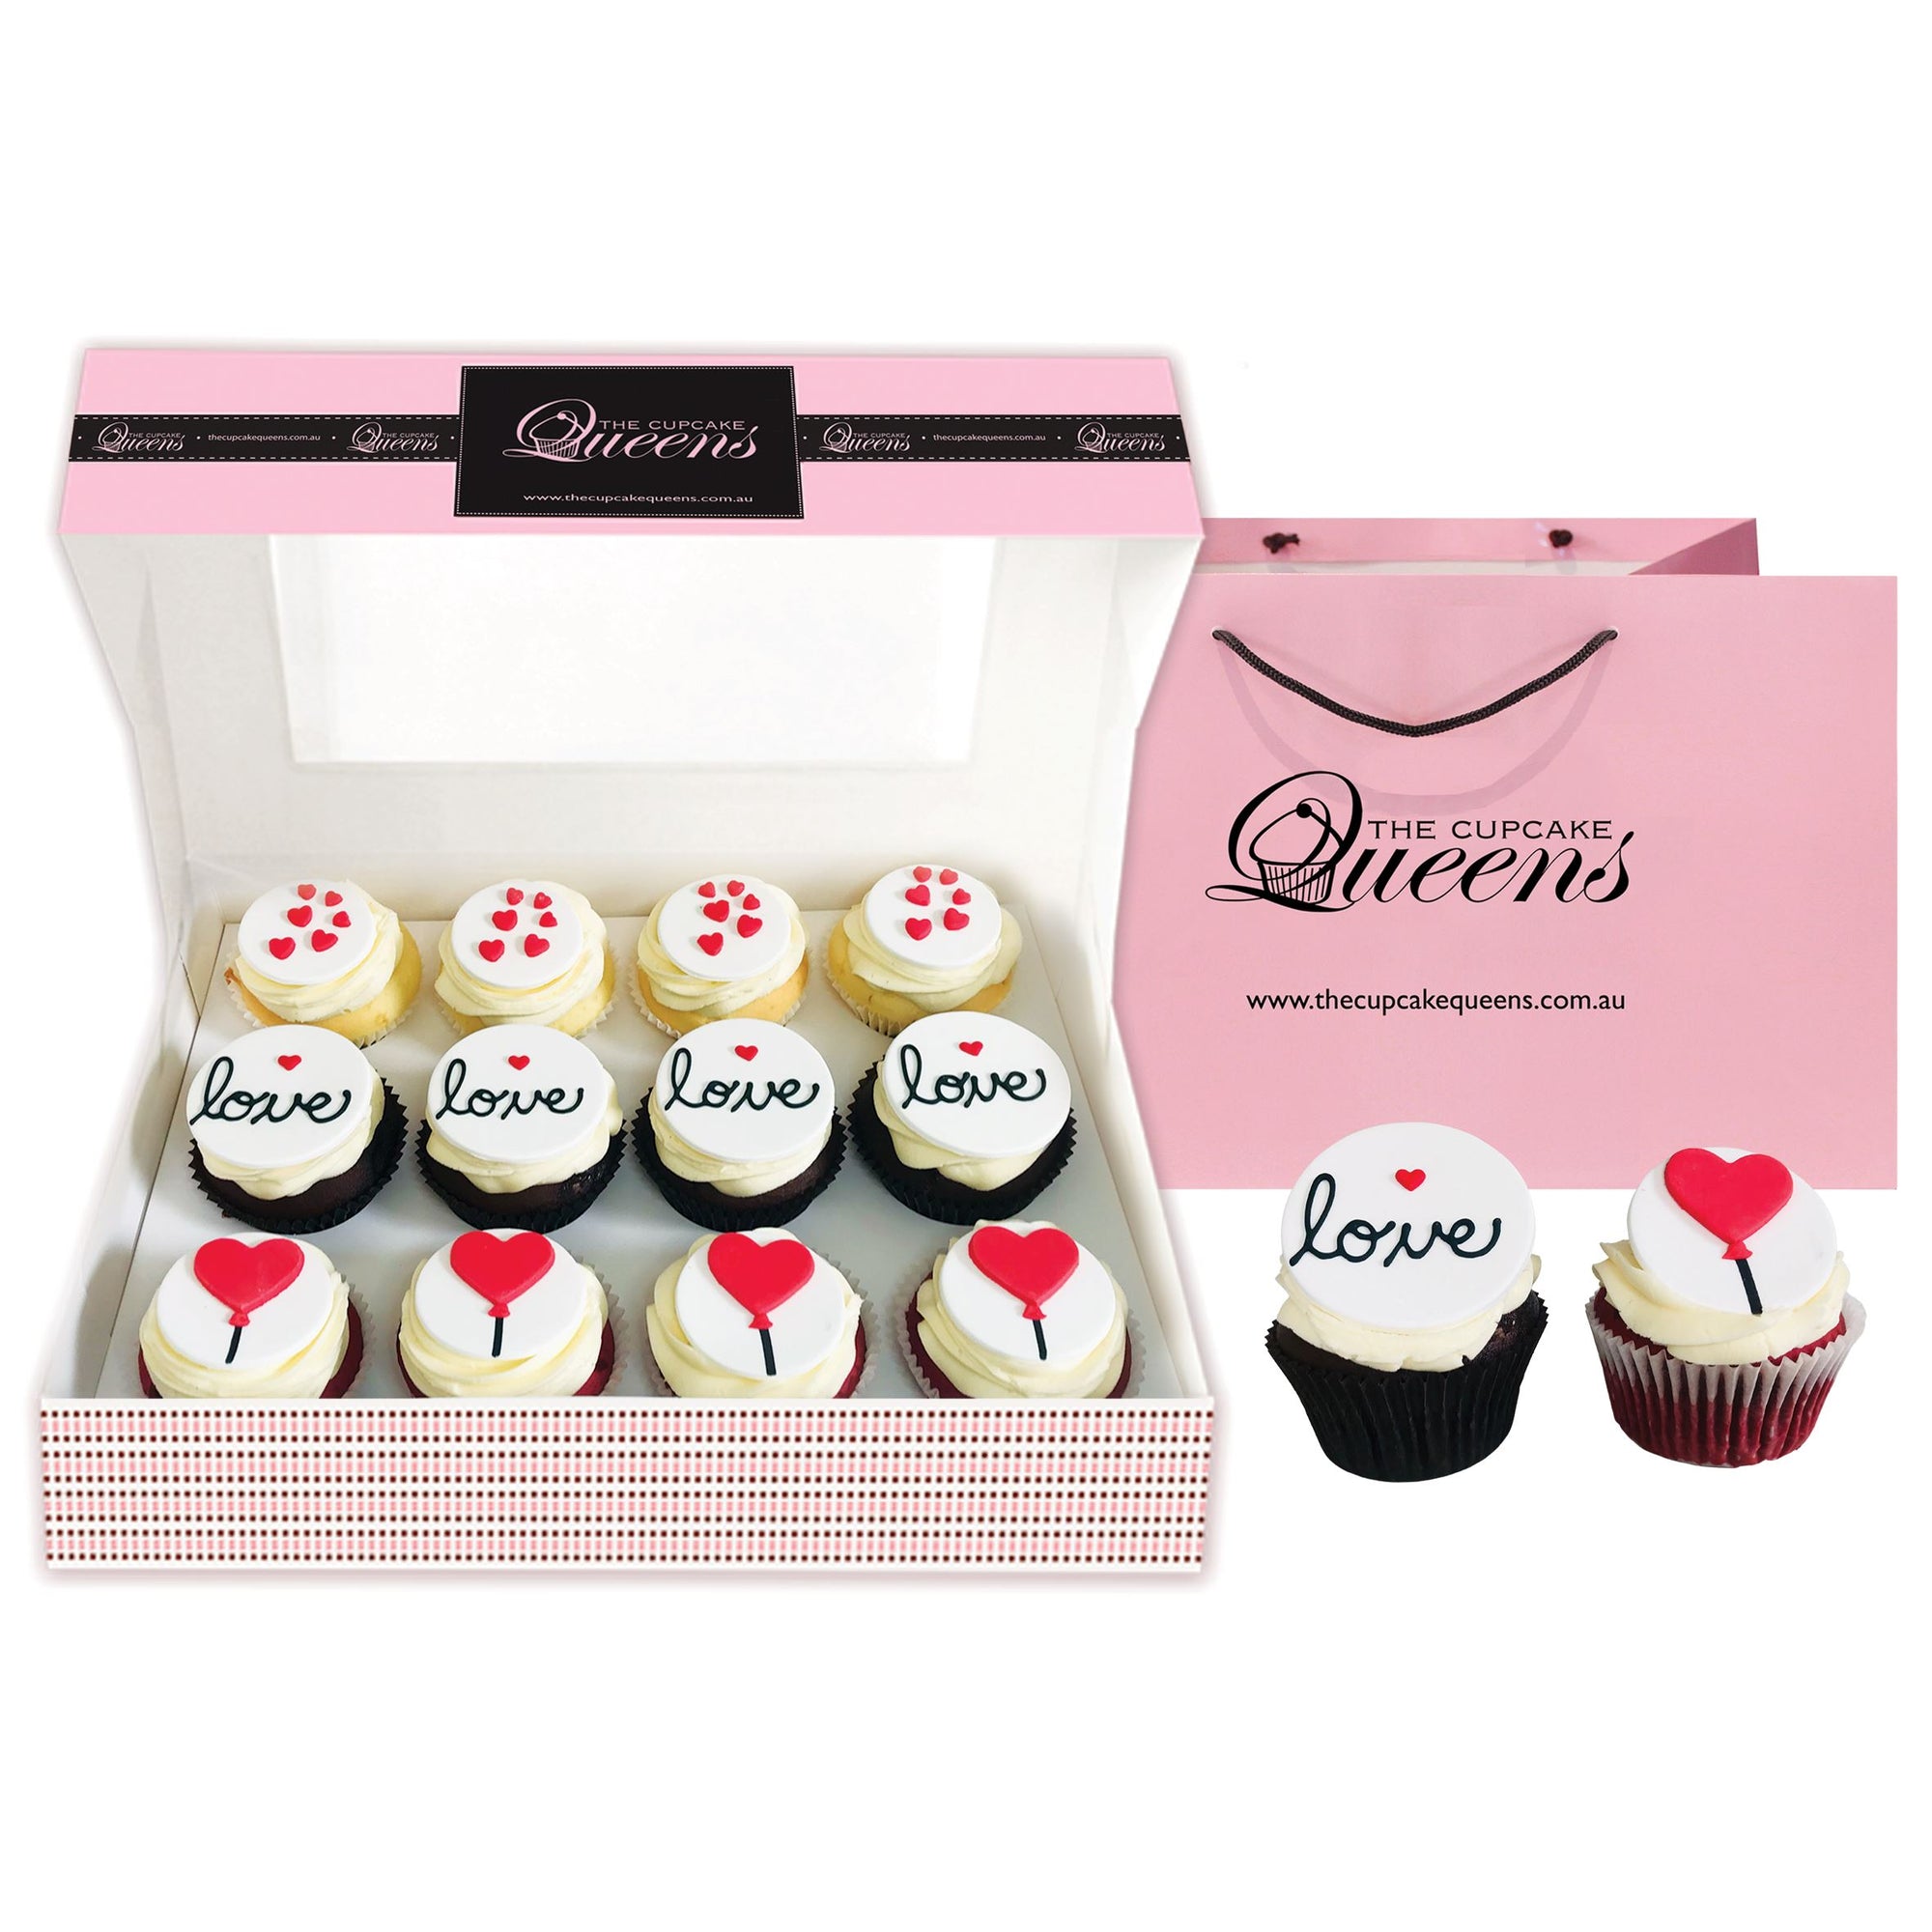 Valentines Day Regular Gift Box Cupcakes The Cupcake Queens 